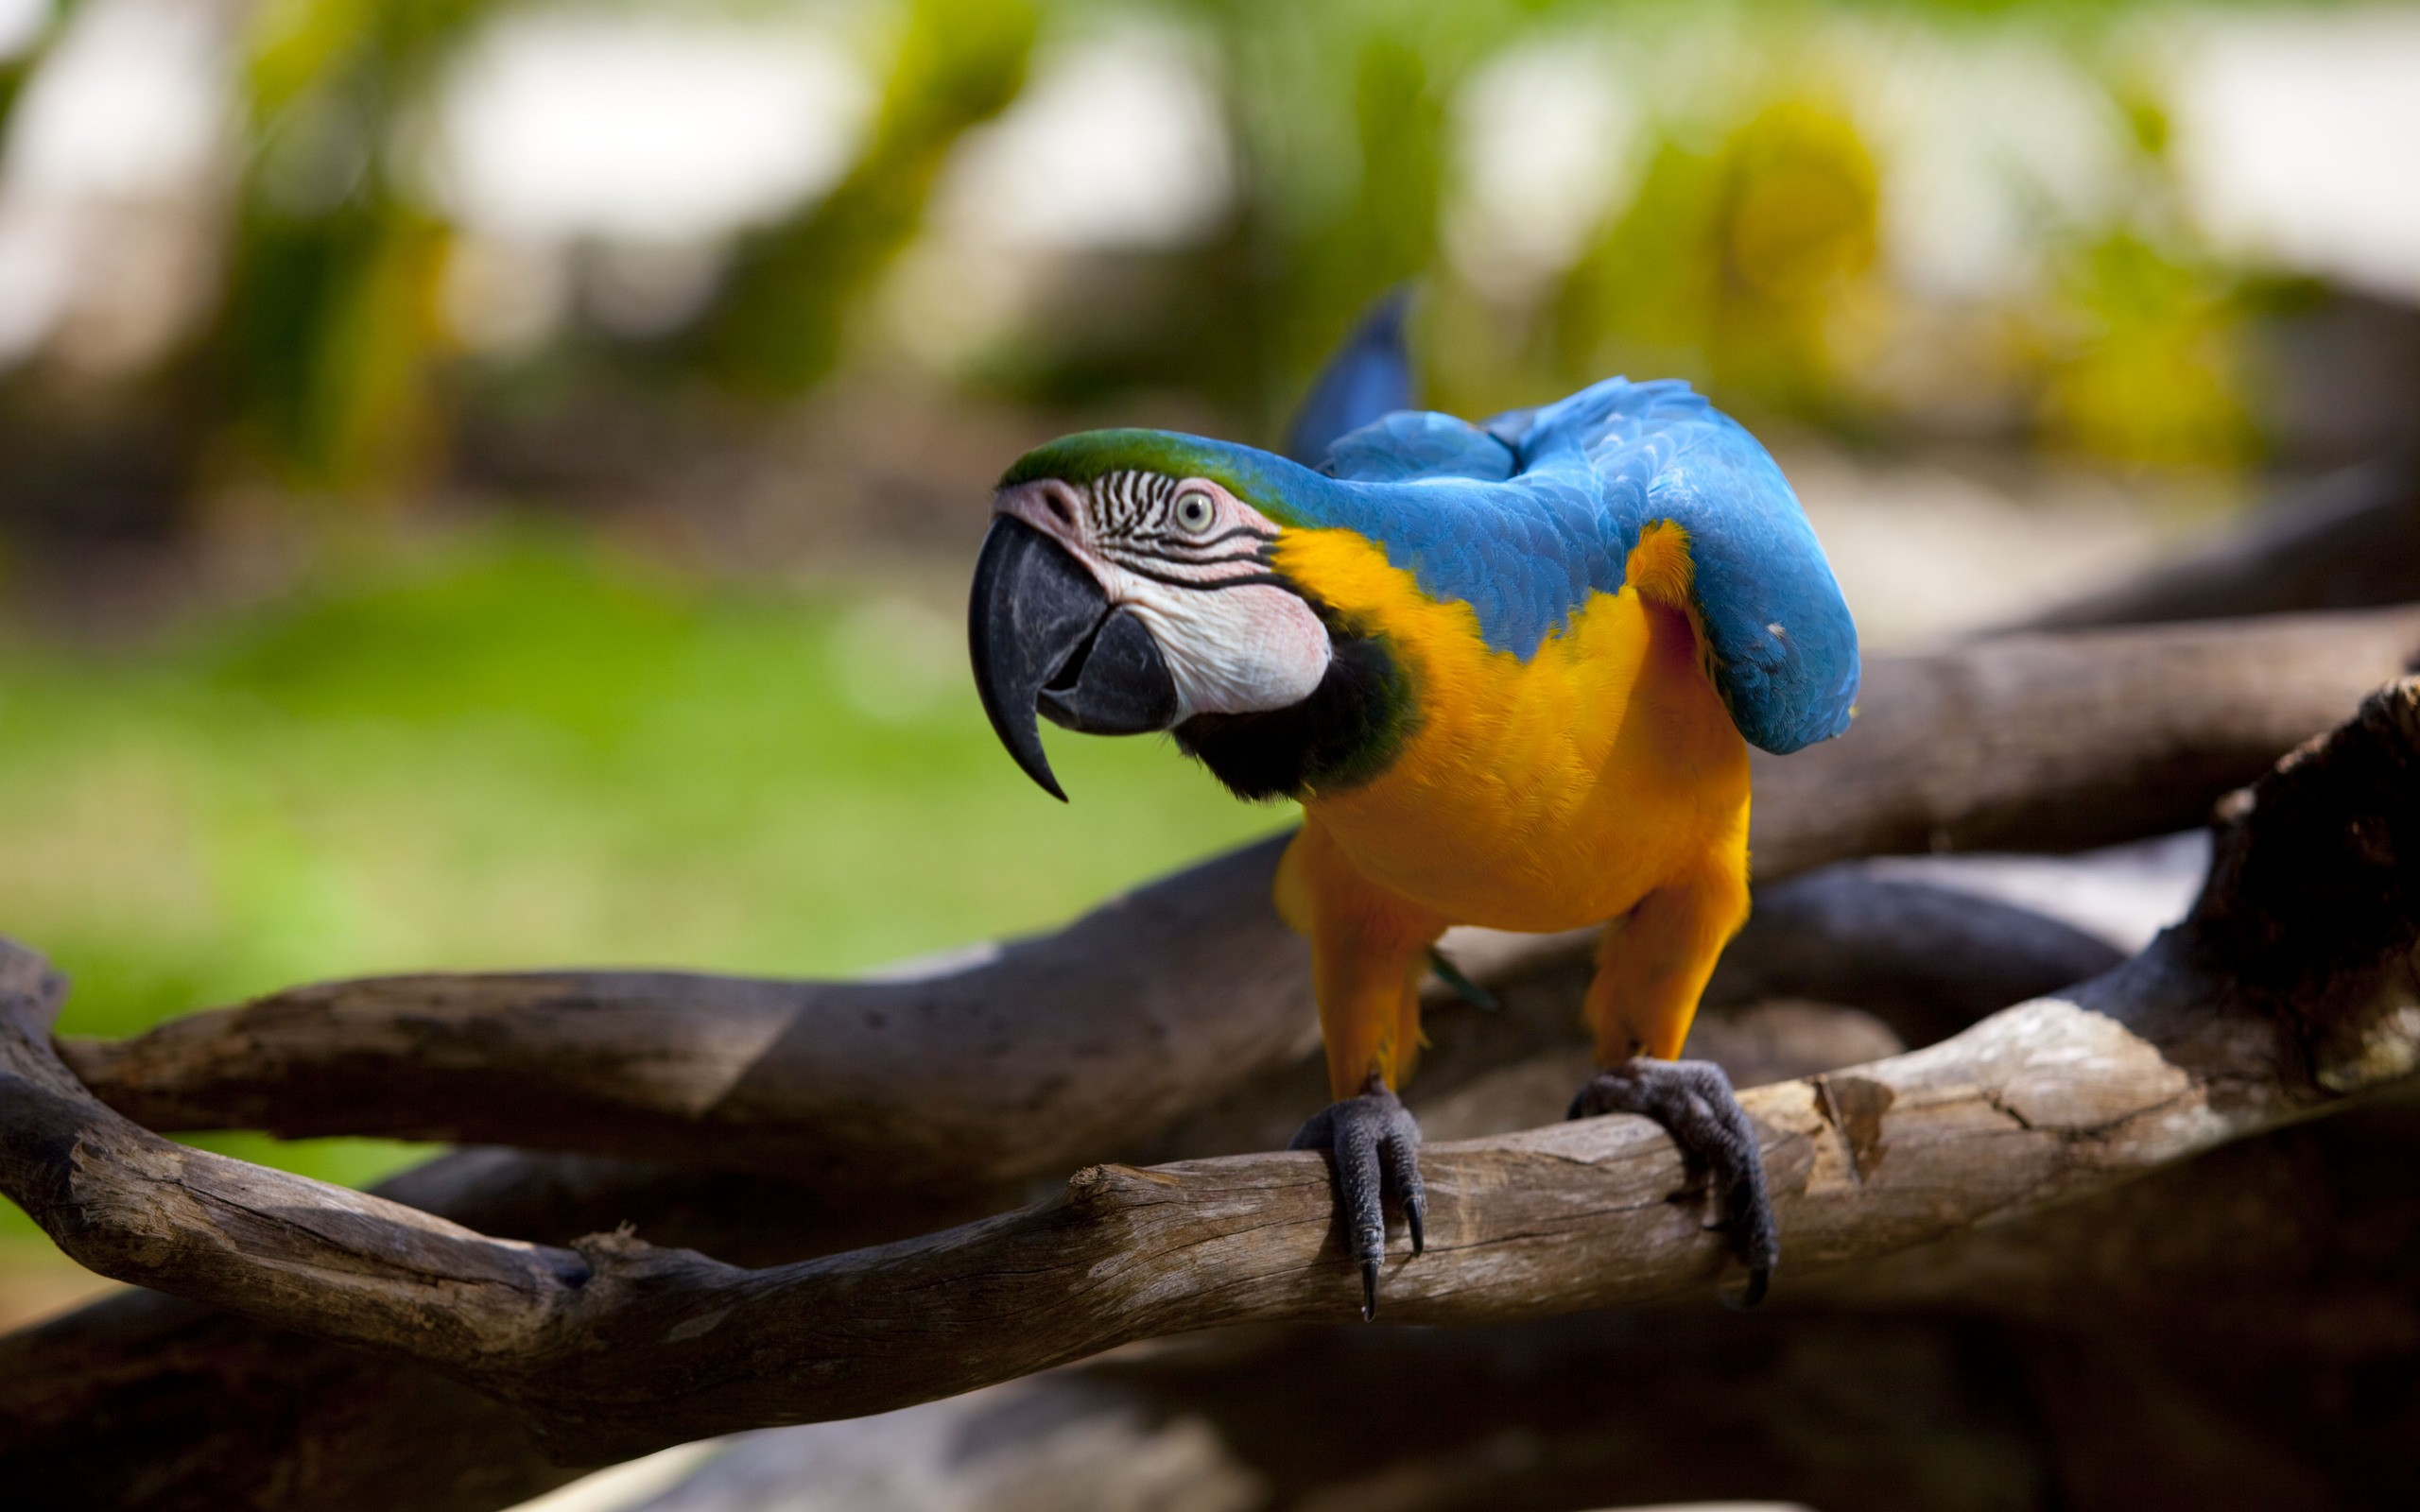 Blue and yellow Macaw Wallpapers and Background Images   stmednet